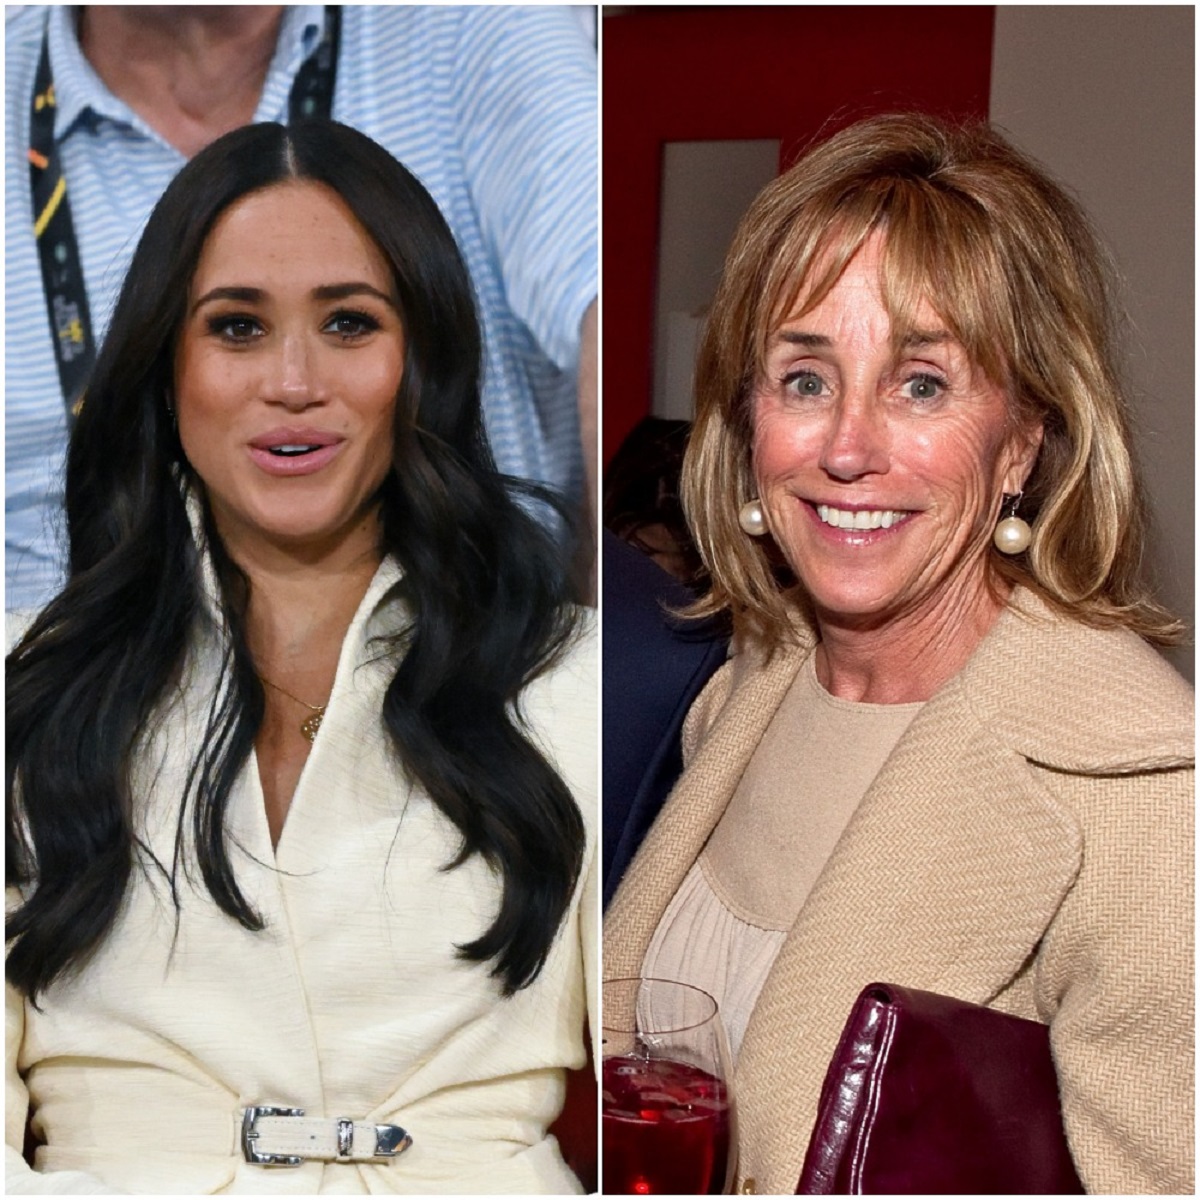 (L): Meghan Markle at the sitting volleyball event during the Invictus Games, (R): Joe Biden's sister, Valerie Biden Owens, smiling for photo at the GRAMMYs